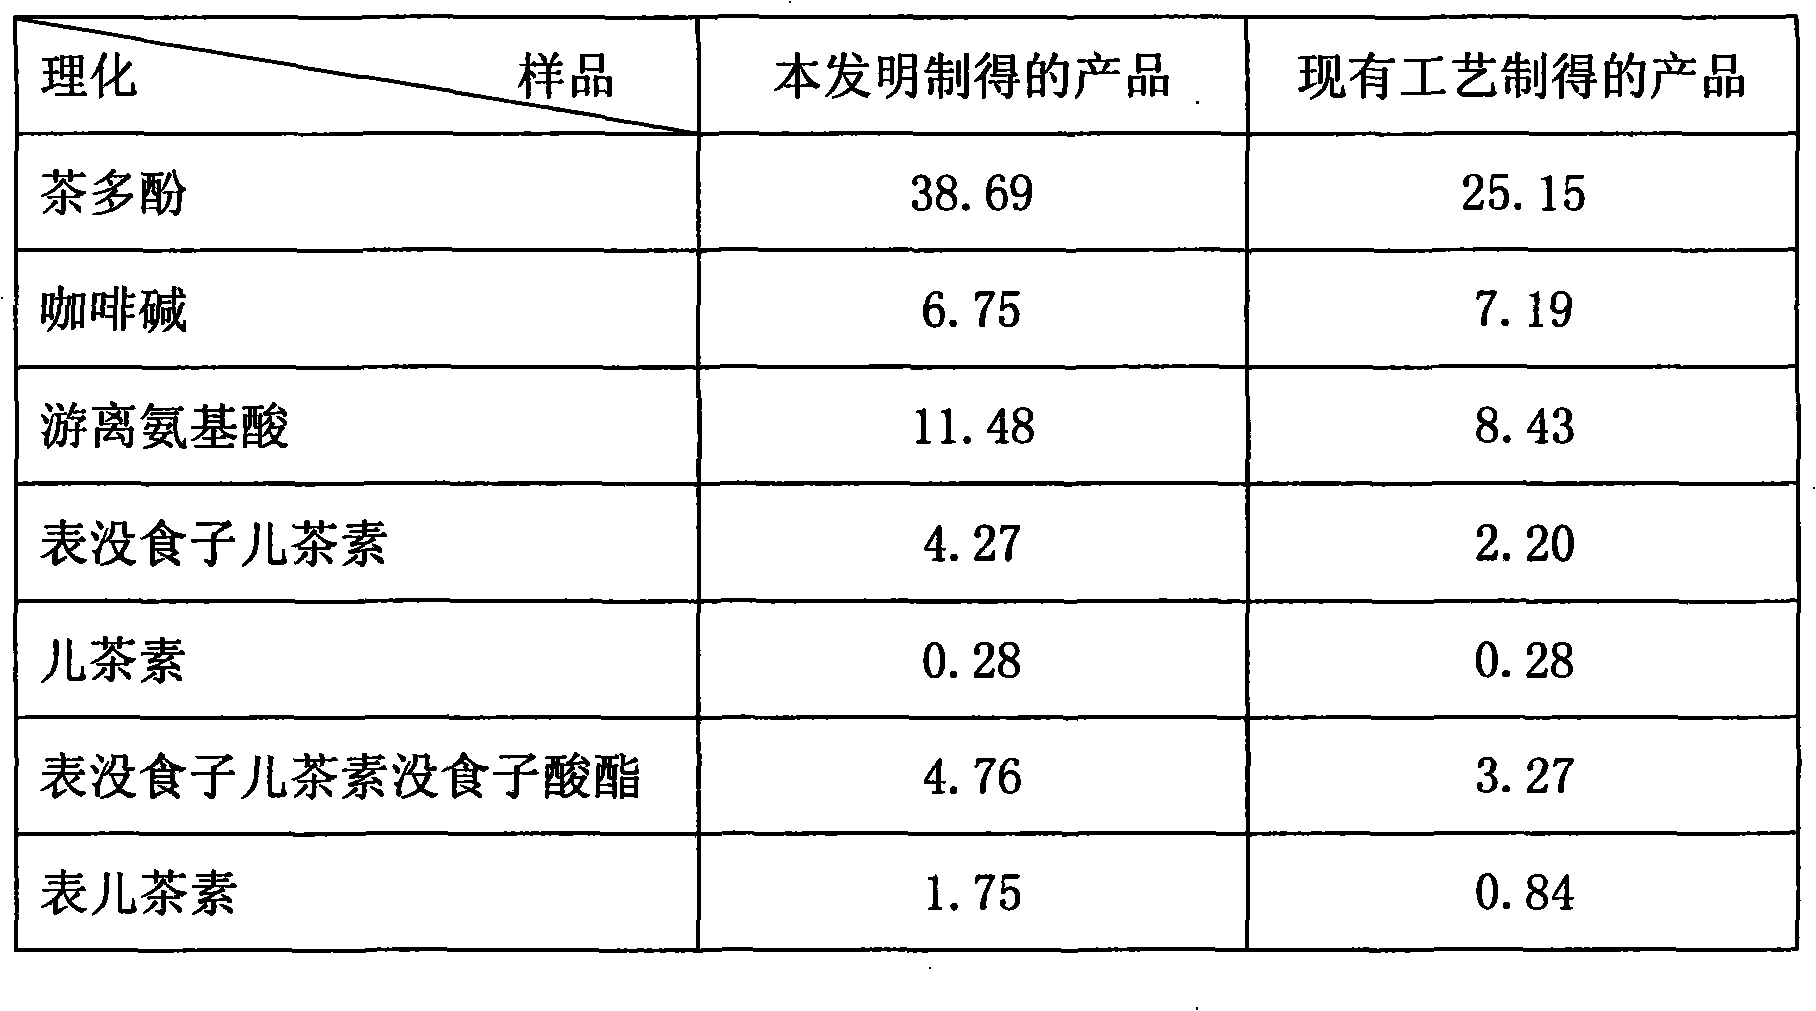 Processing method for cold instant white tea powder